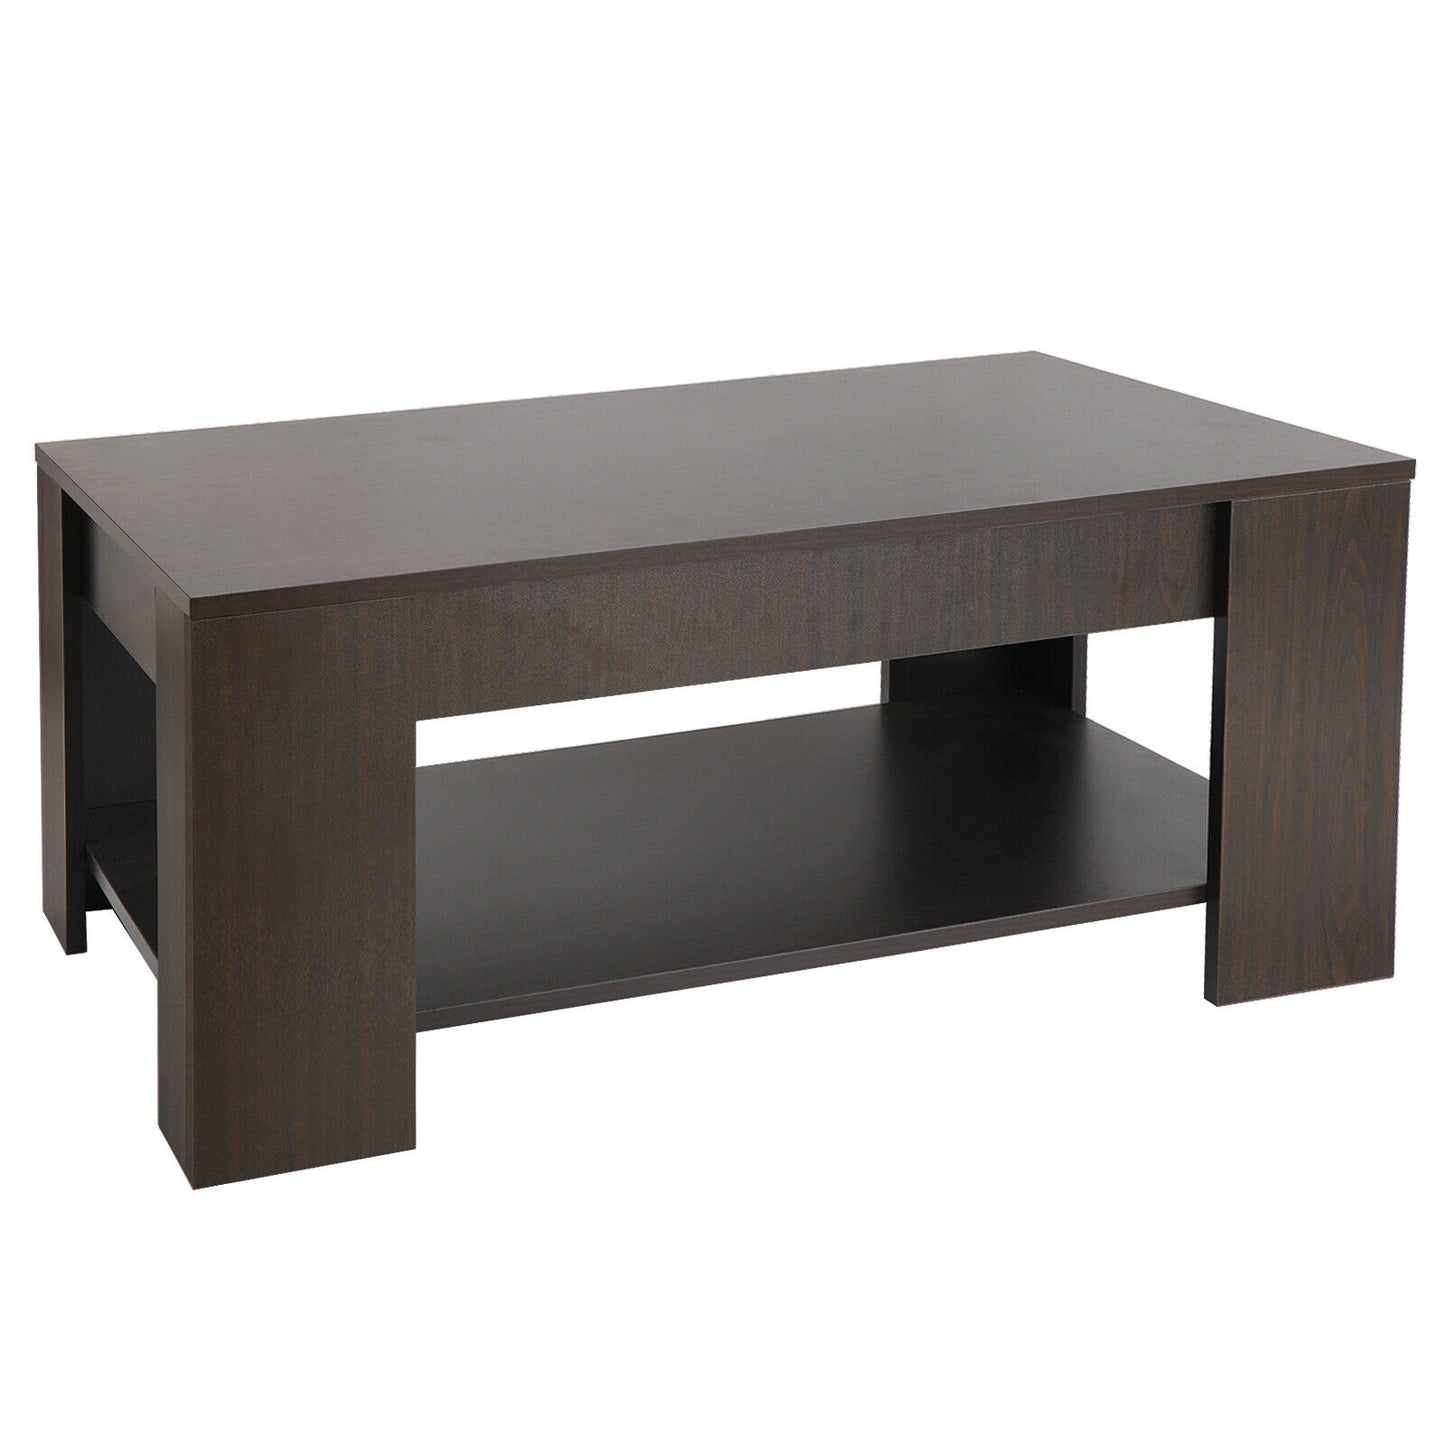 Lift Top Coffee Table w Hidden Compartment Storage Shelf Living Room Furniture